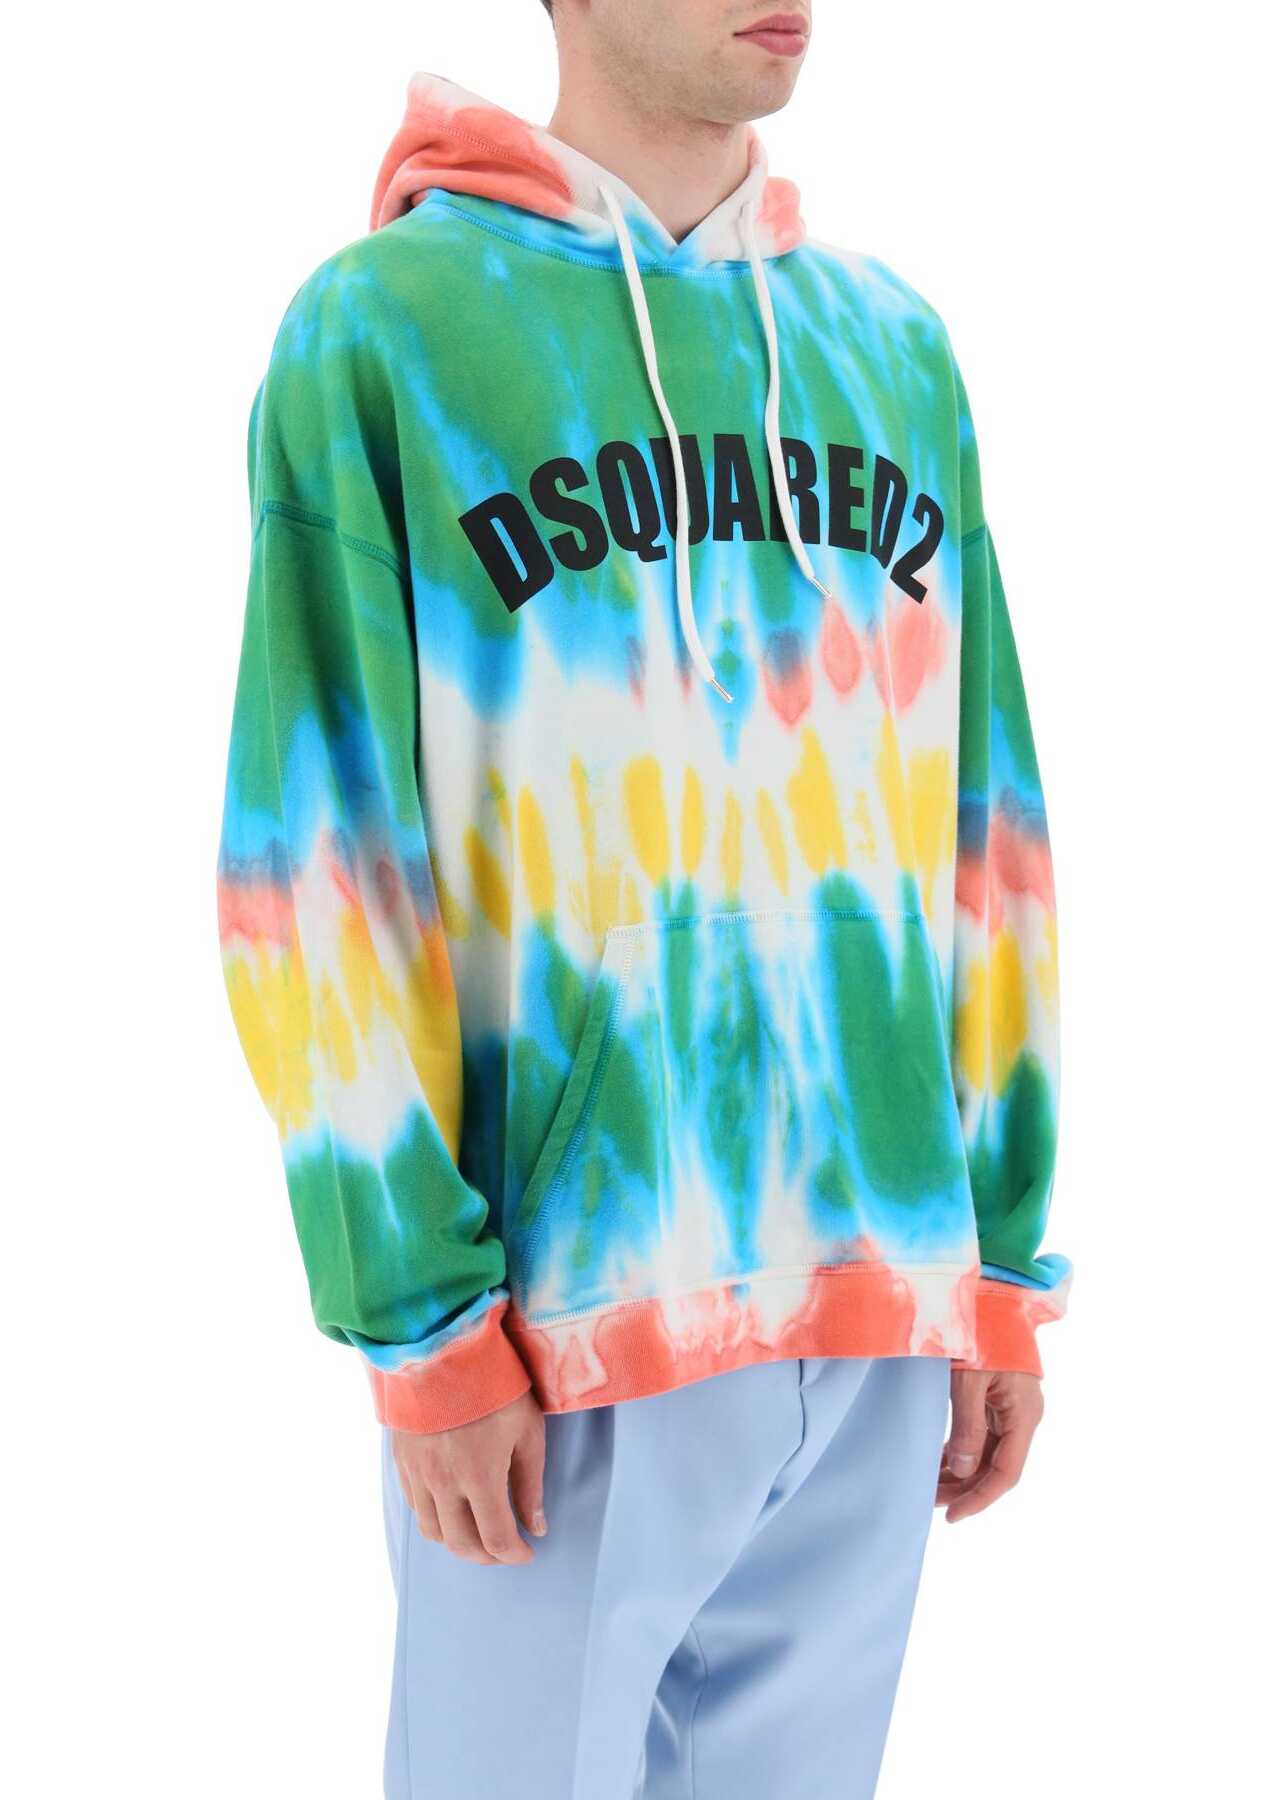 DSQUARED2 Tie-Dye Hoodie With Logo Print CORAL YELLOW GREEN OFF WHITE BLUE